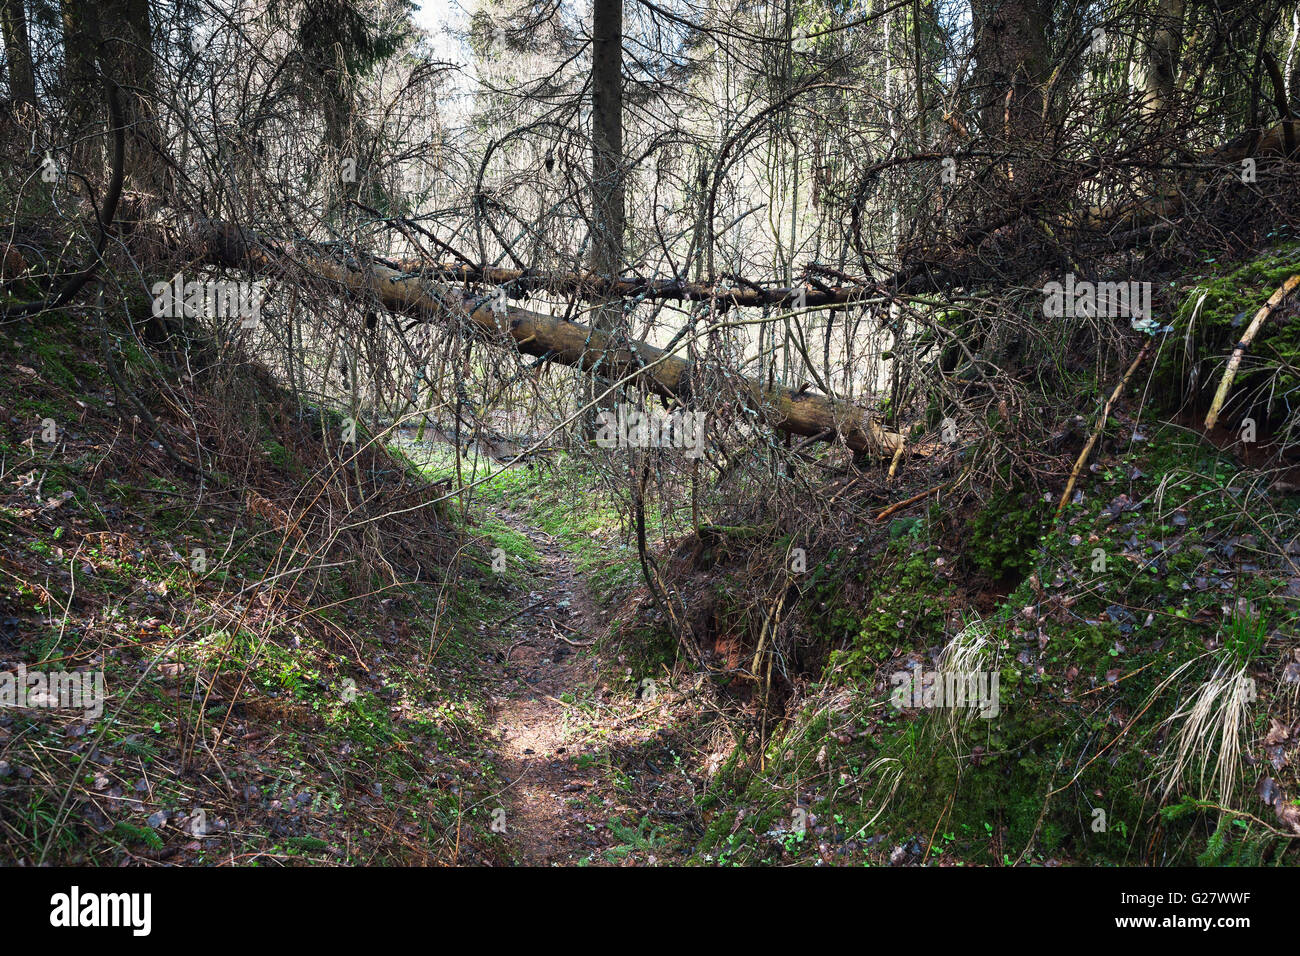 Dangerous footpath goes through dark wild forest with old spruce trees Stock Photo